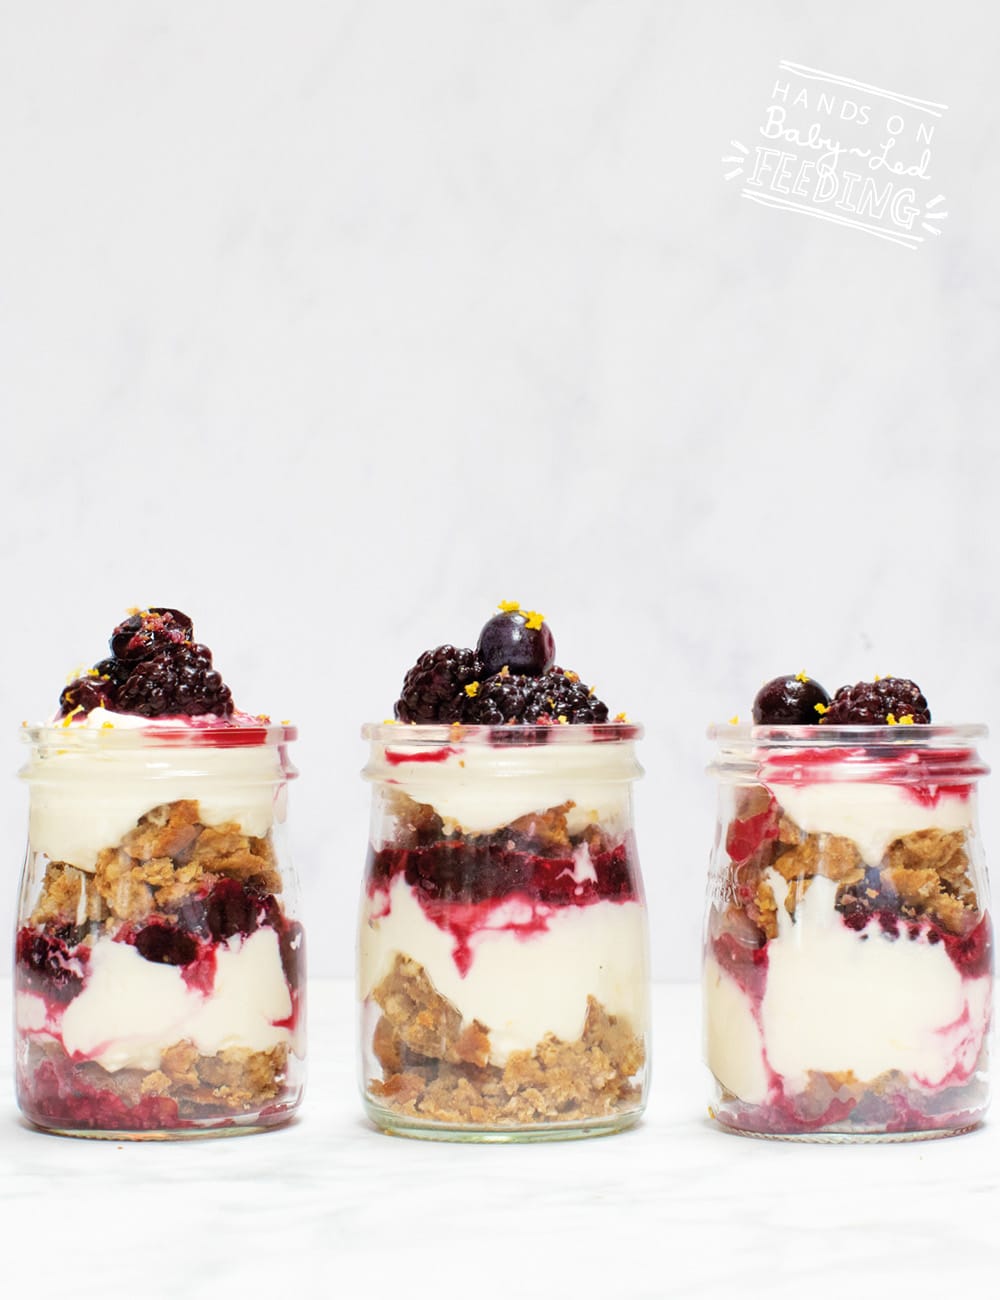 Blackberry and Blueberry Cheesecake Jar Recipe Images5